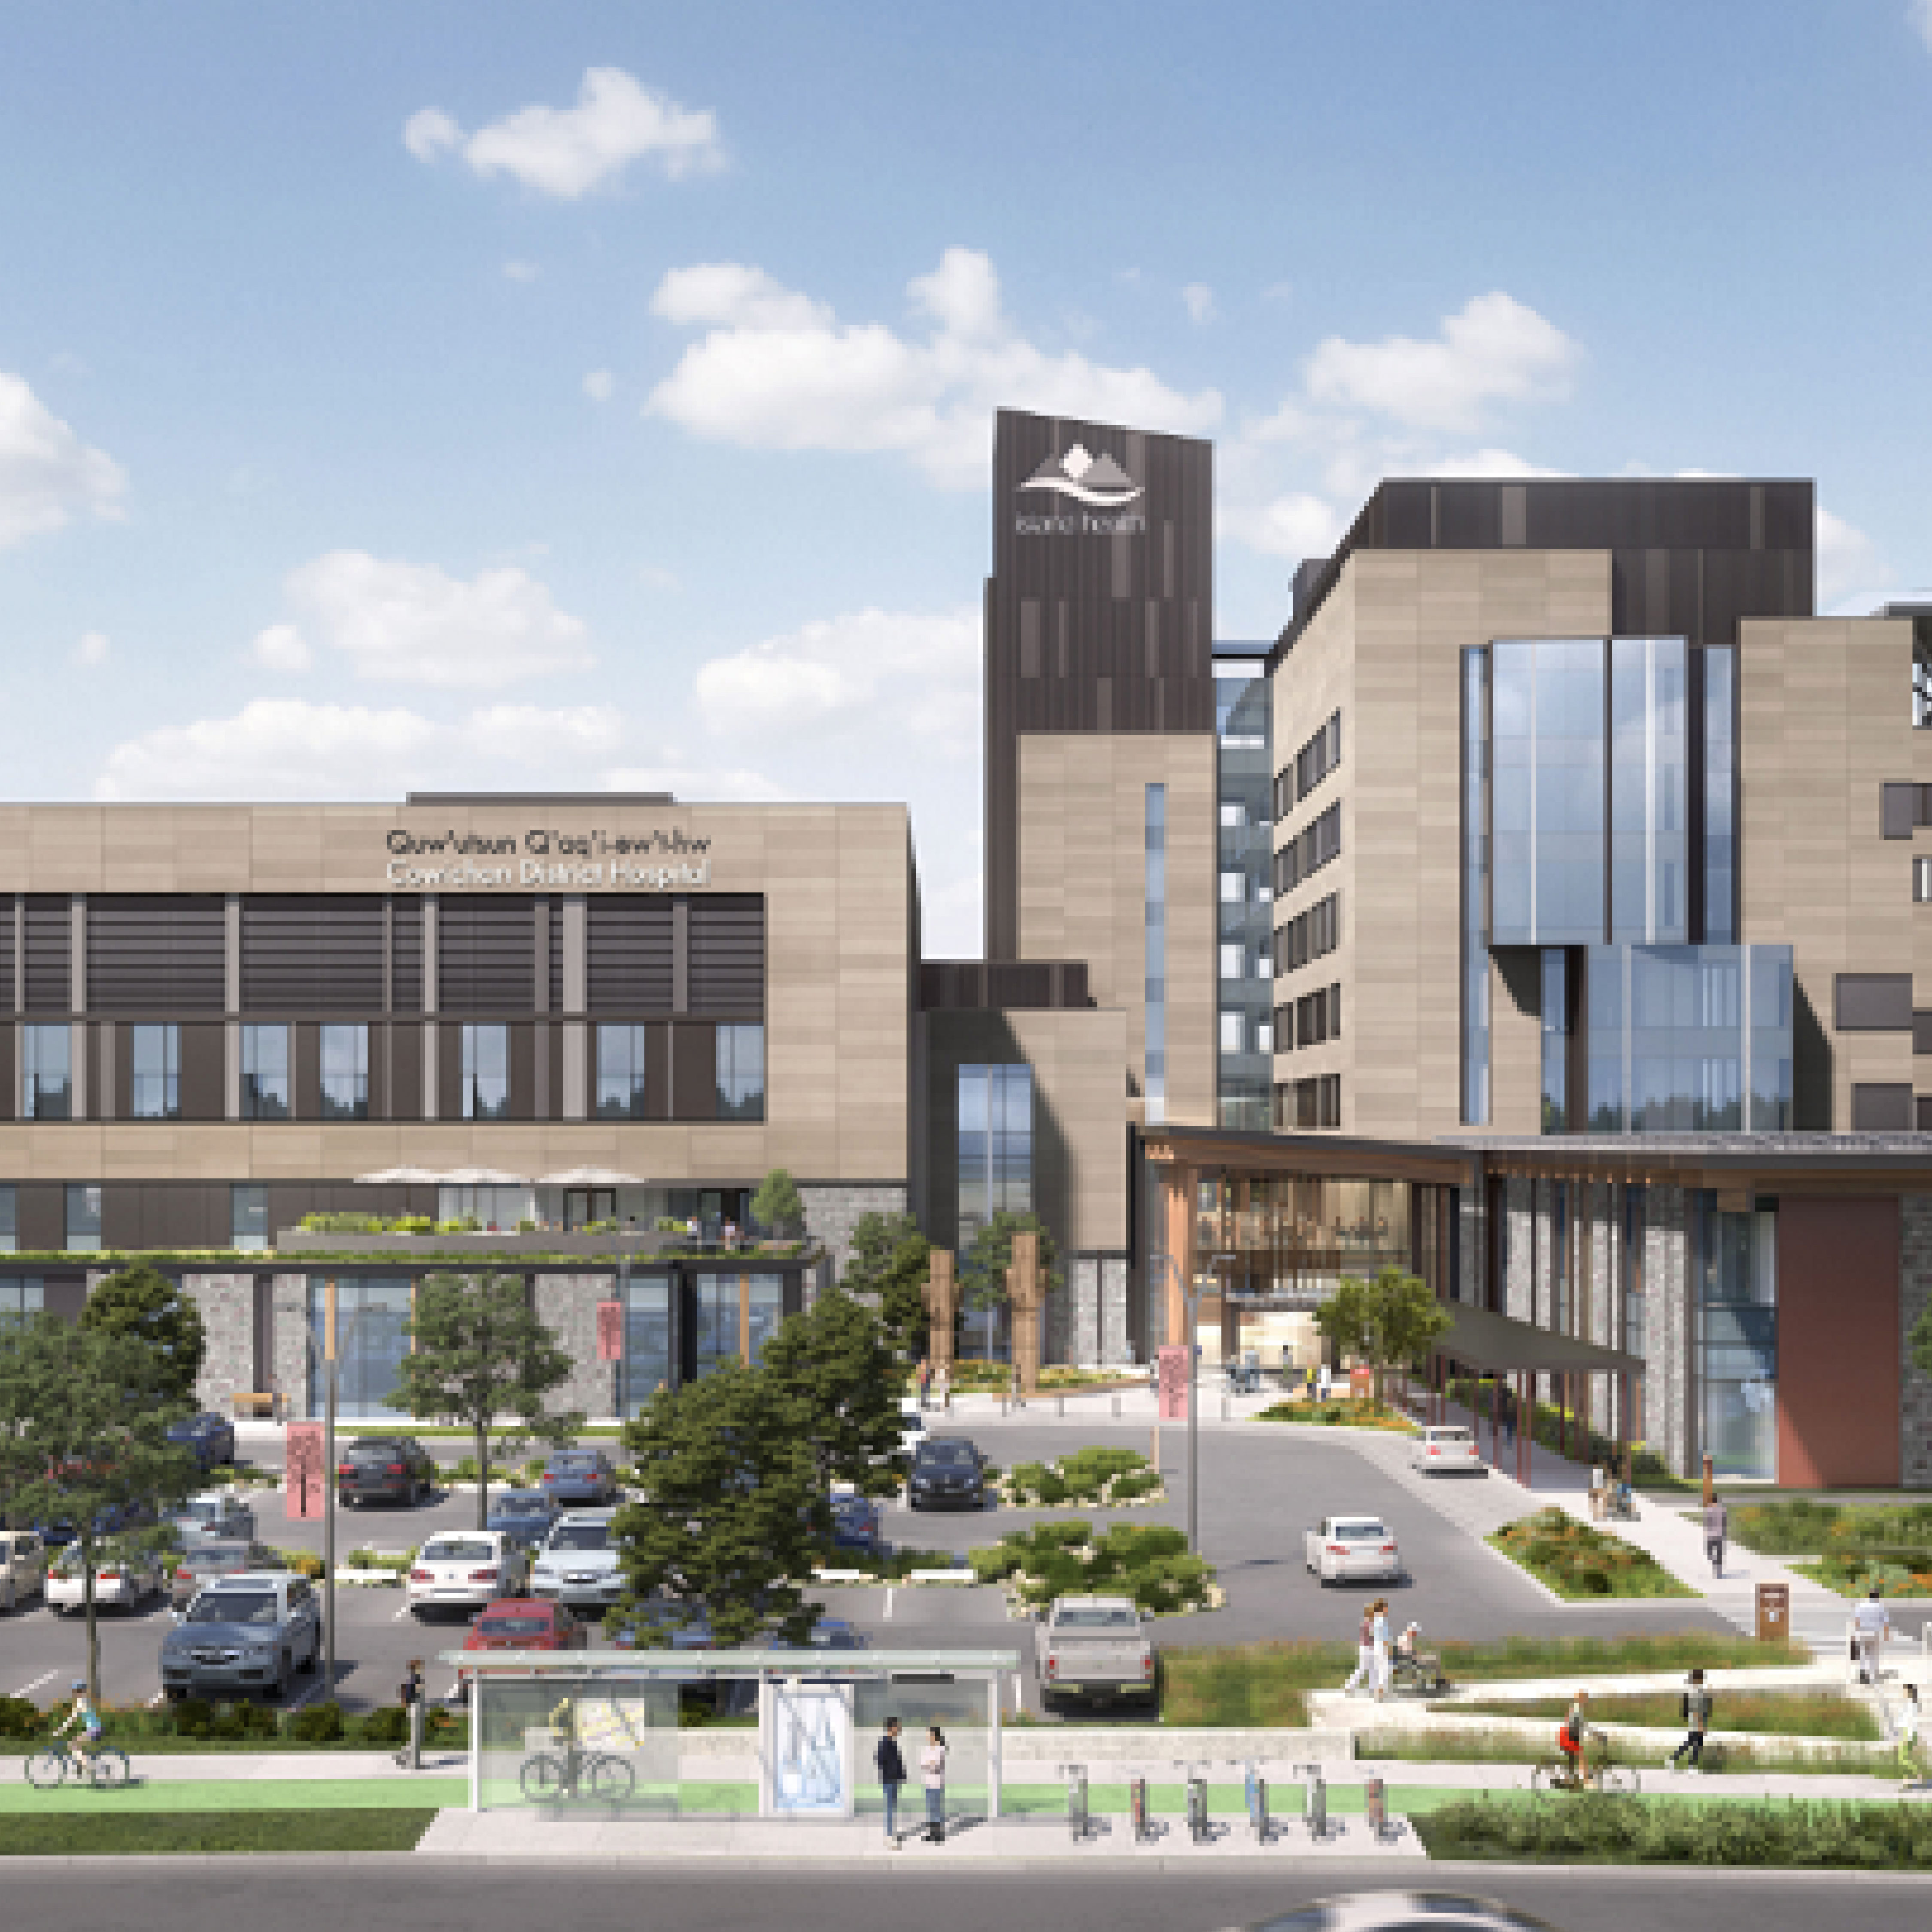 Island Health | Infrastructure BC – Cowichan District Hospital Replacement